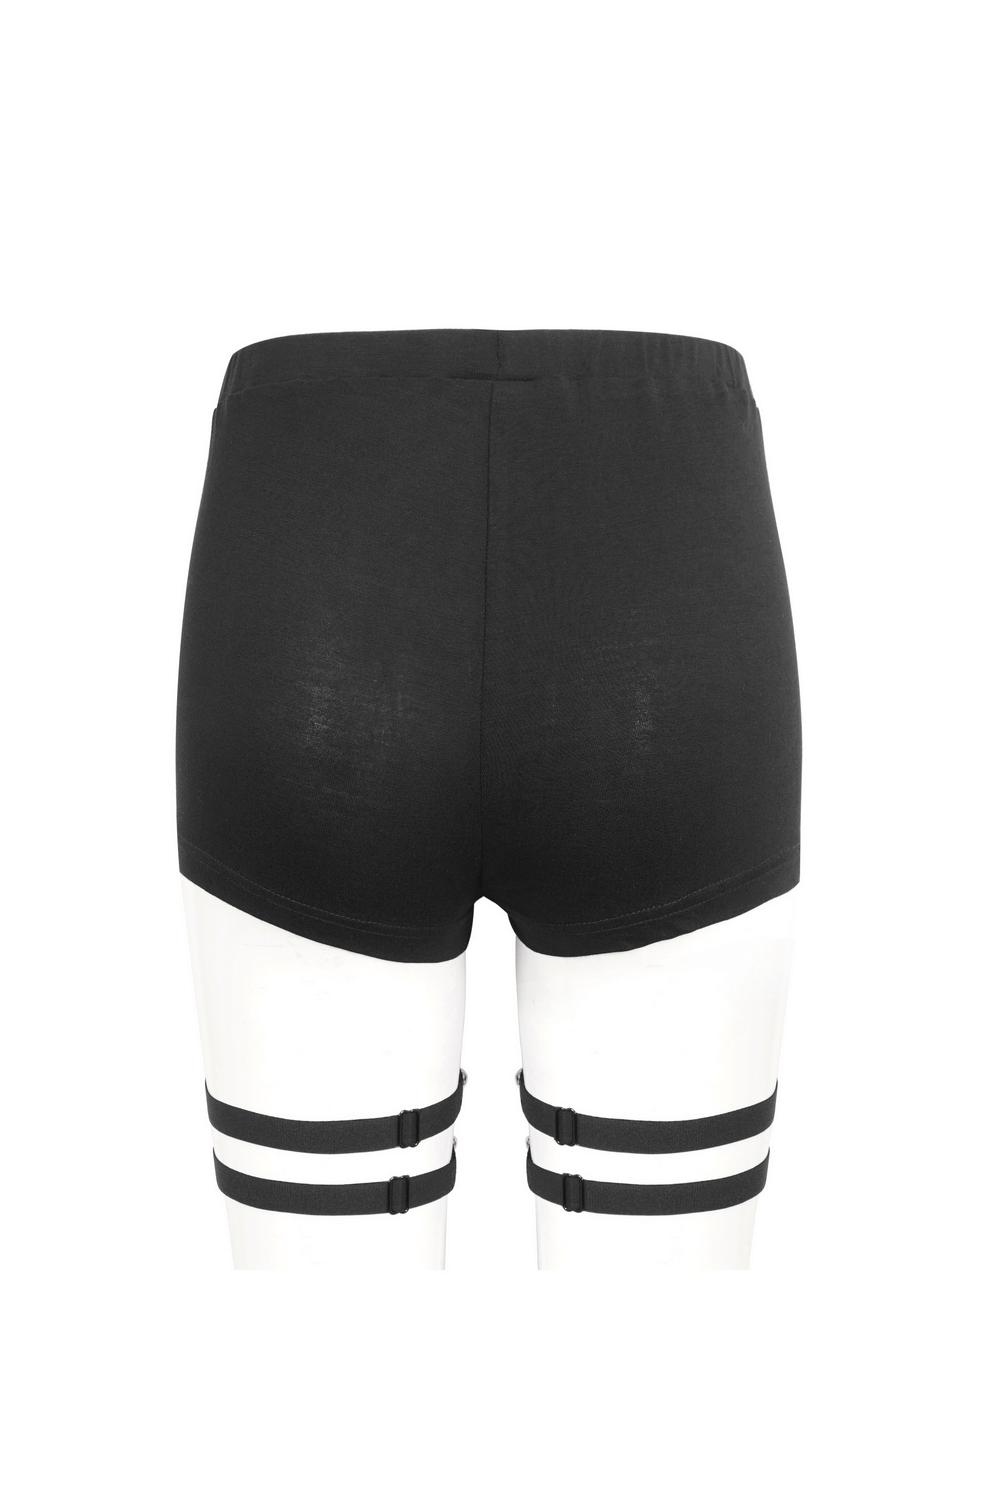 Chic High-Waisted Garter Shorts with Rivets for Women